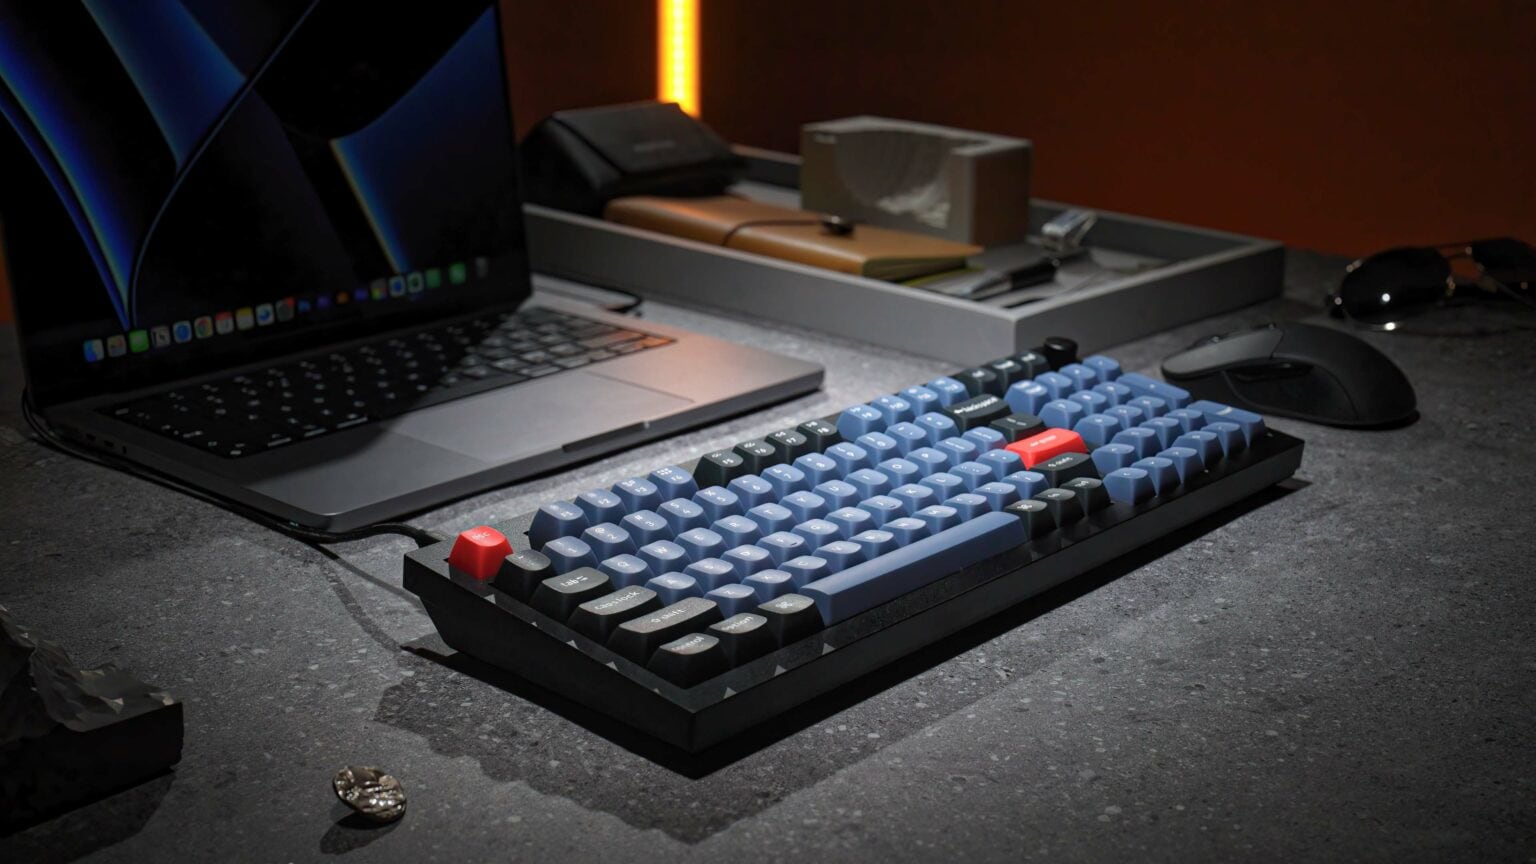 Keychron's new Q5 is nearly full sized and completely customizable.